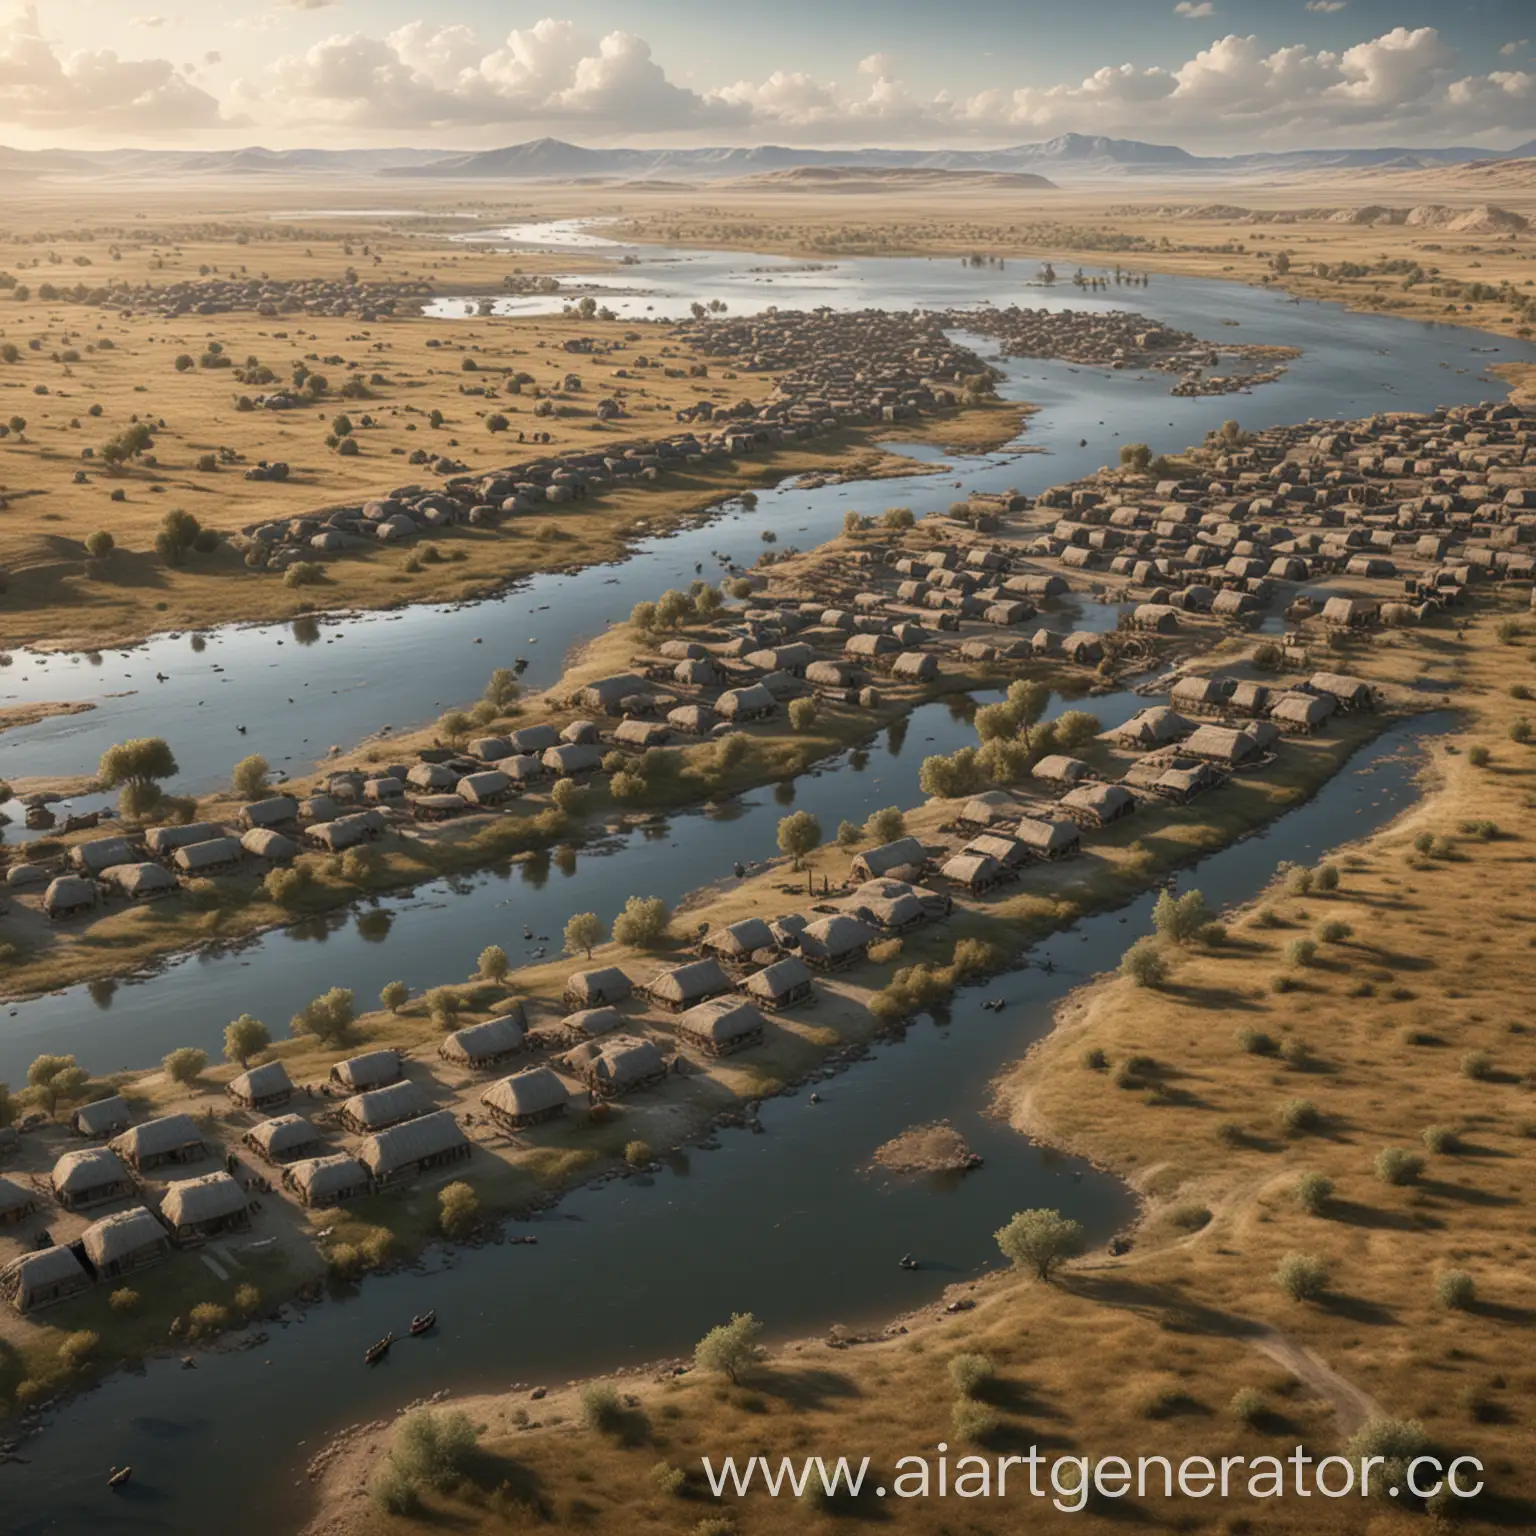 First-Person-View-of-Ancient-Hunters-Migratory-Settlement-by-the-River